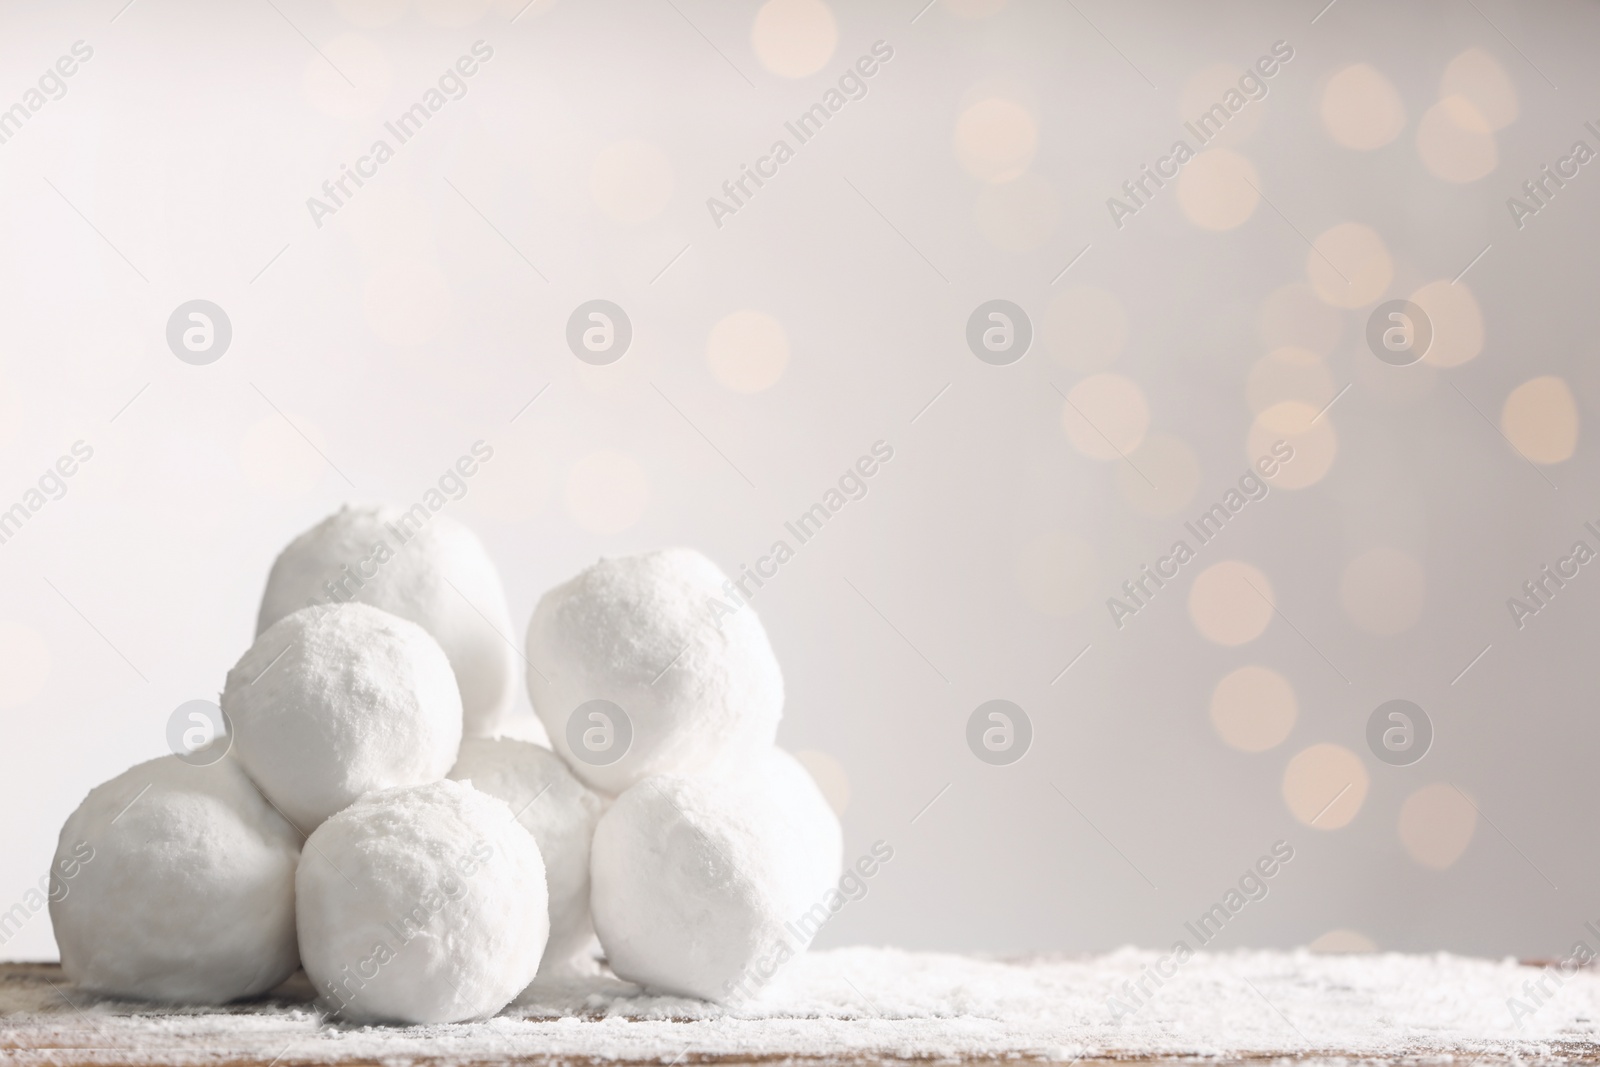 Photo of Snowballs on table against blurred lights, space for text